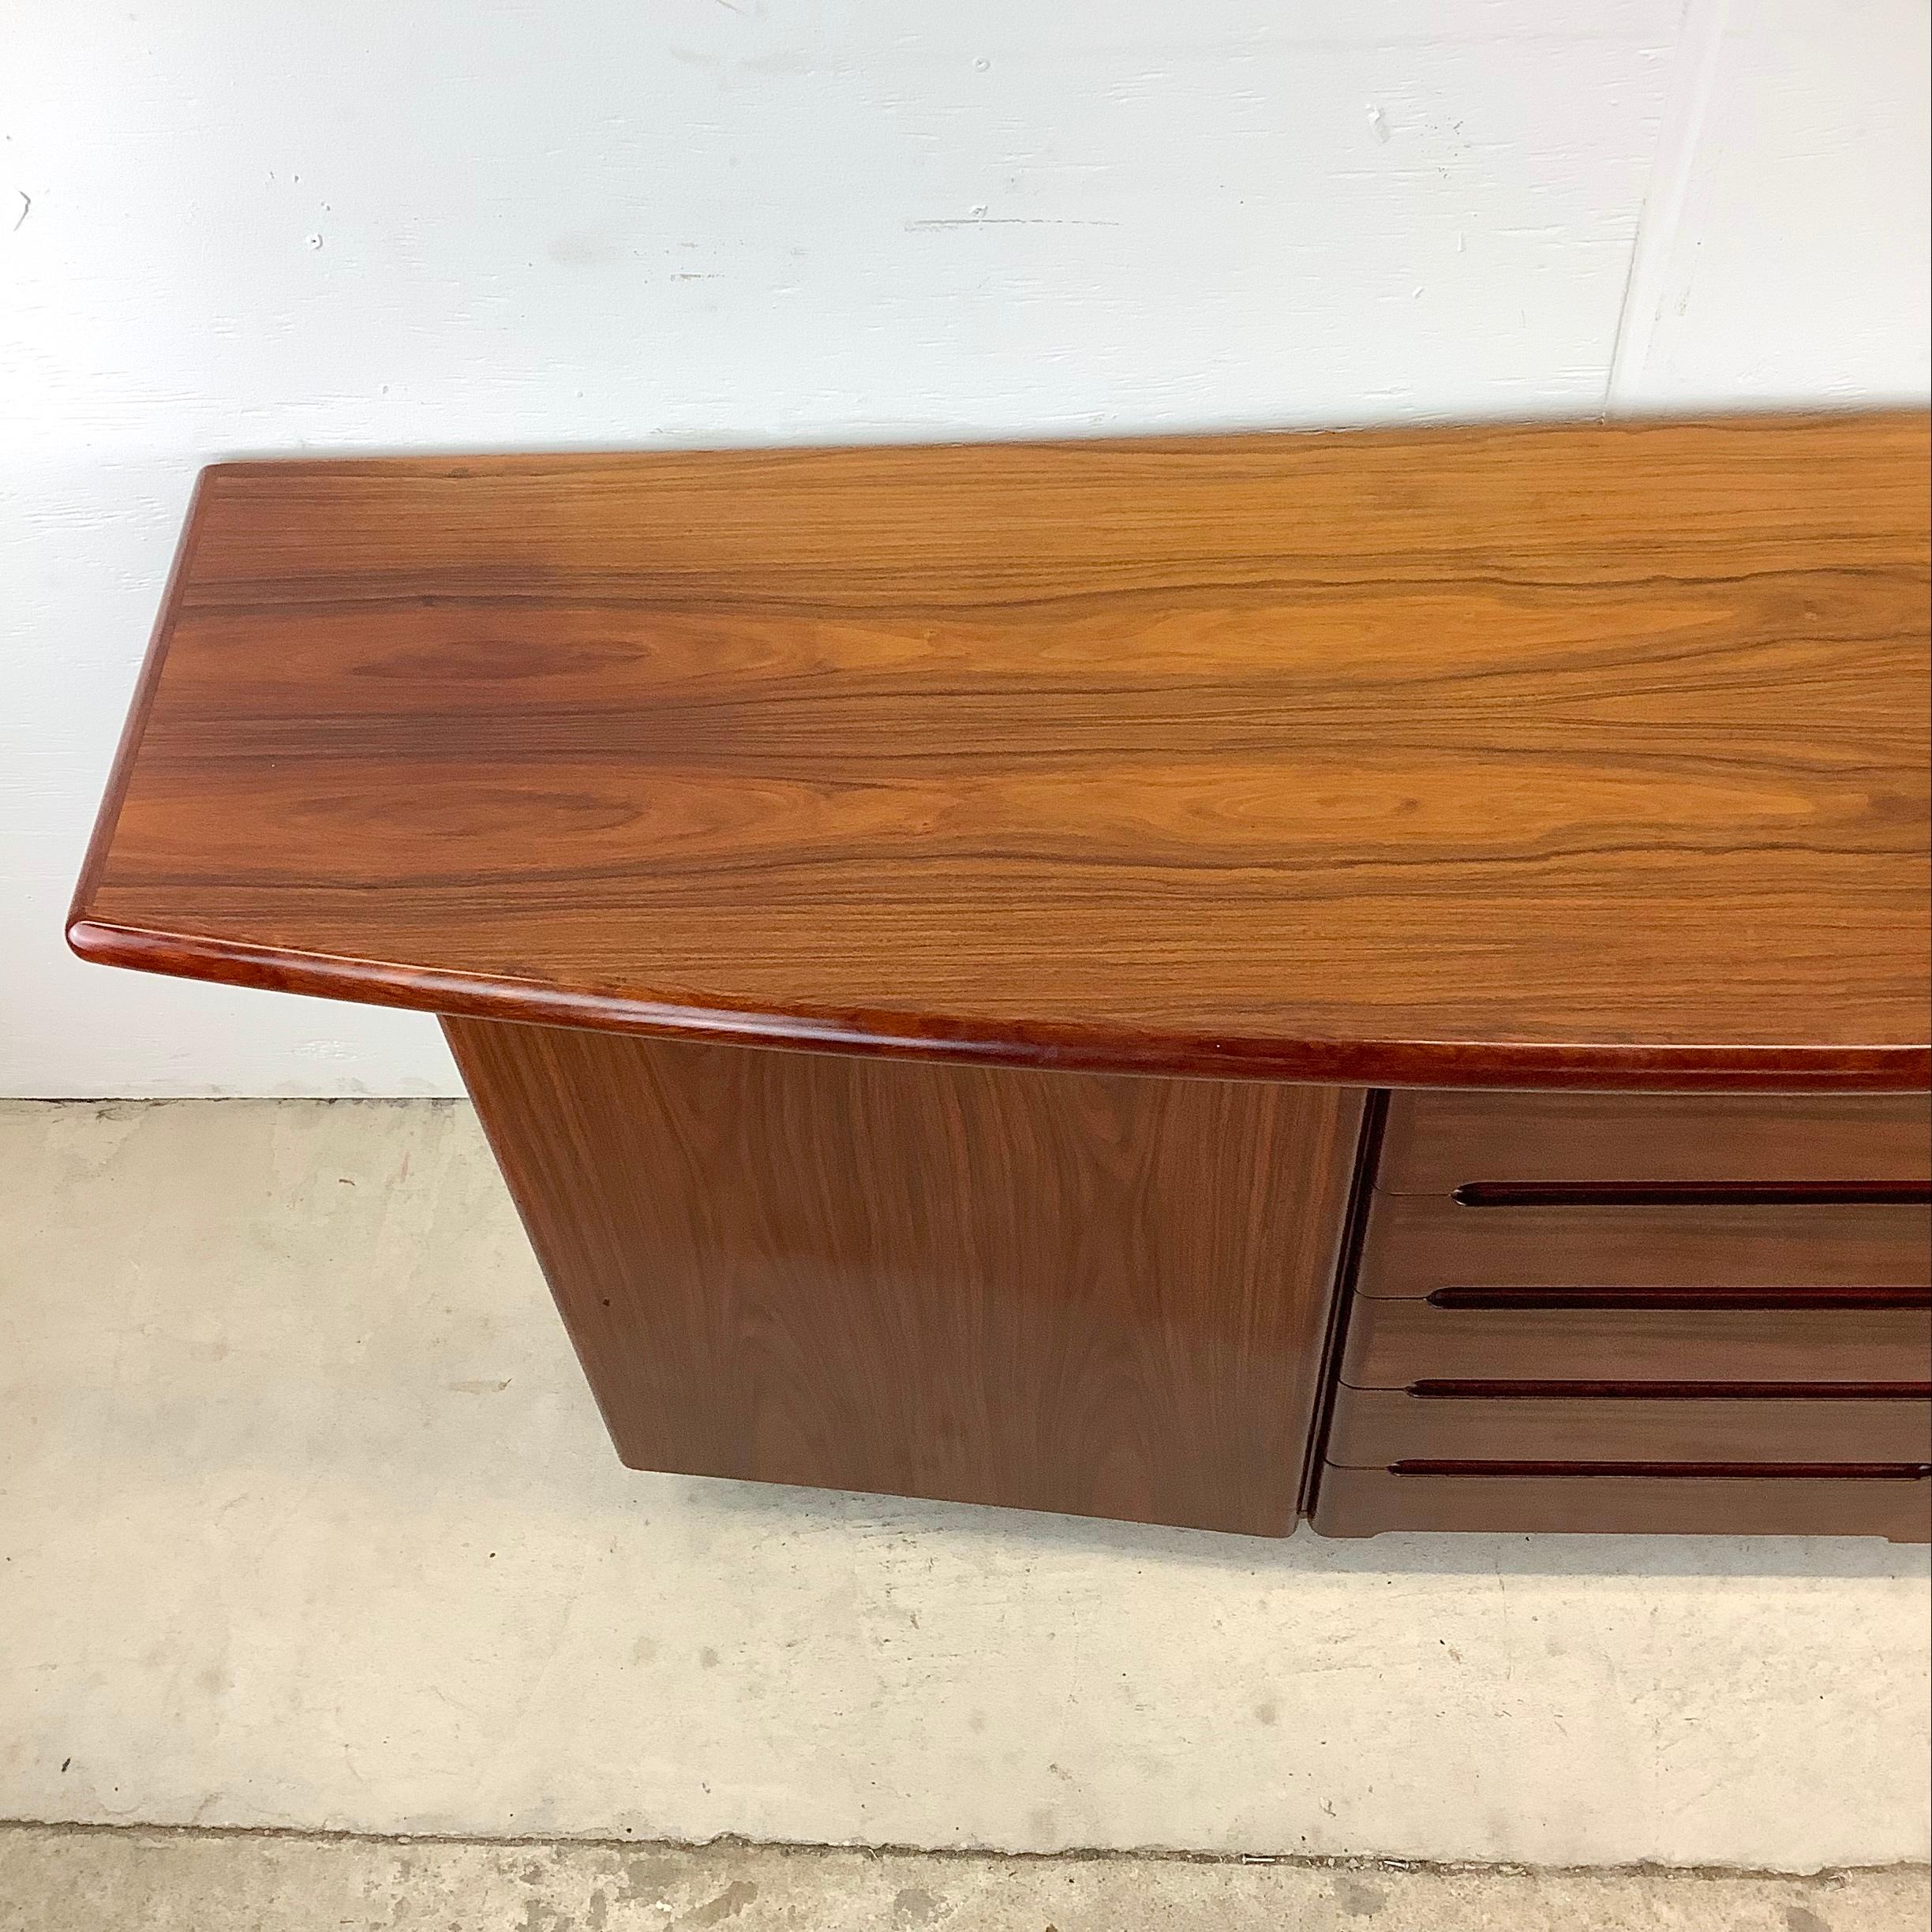 Scandinavian Modern Rosewood Credenza by Skovby In Distressed Condition For Sale In Trenton, NJ